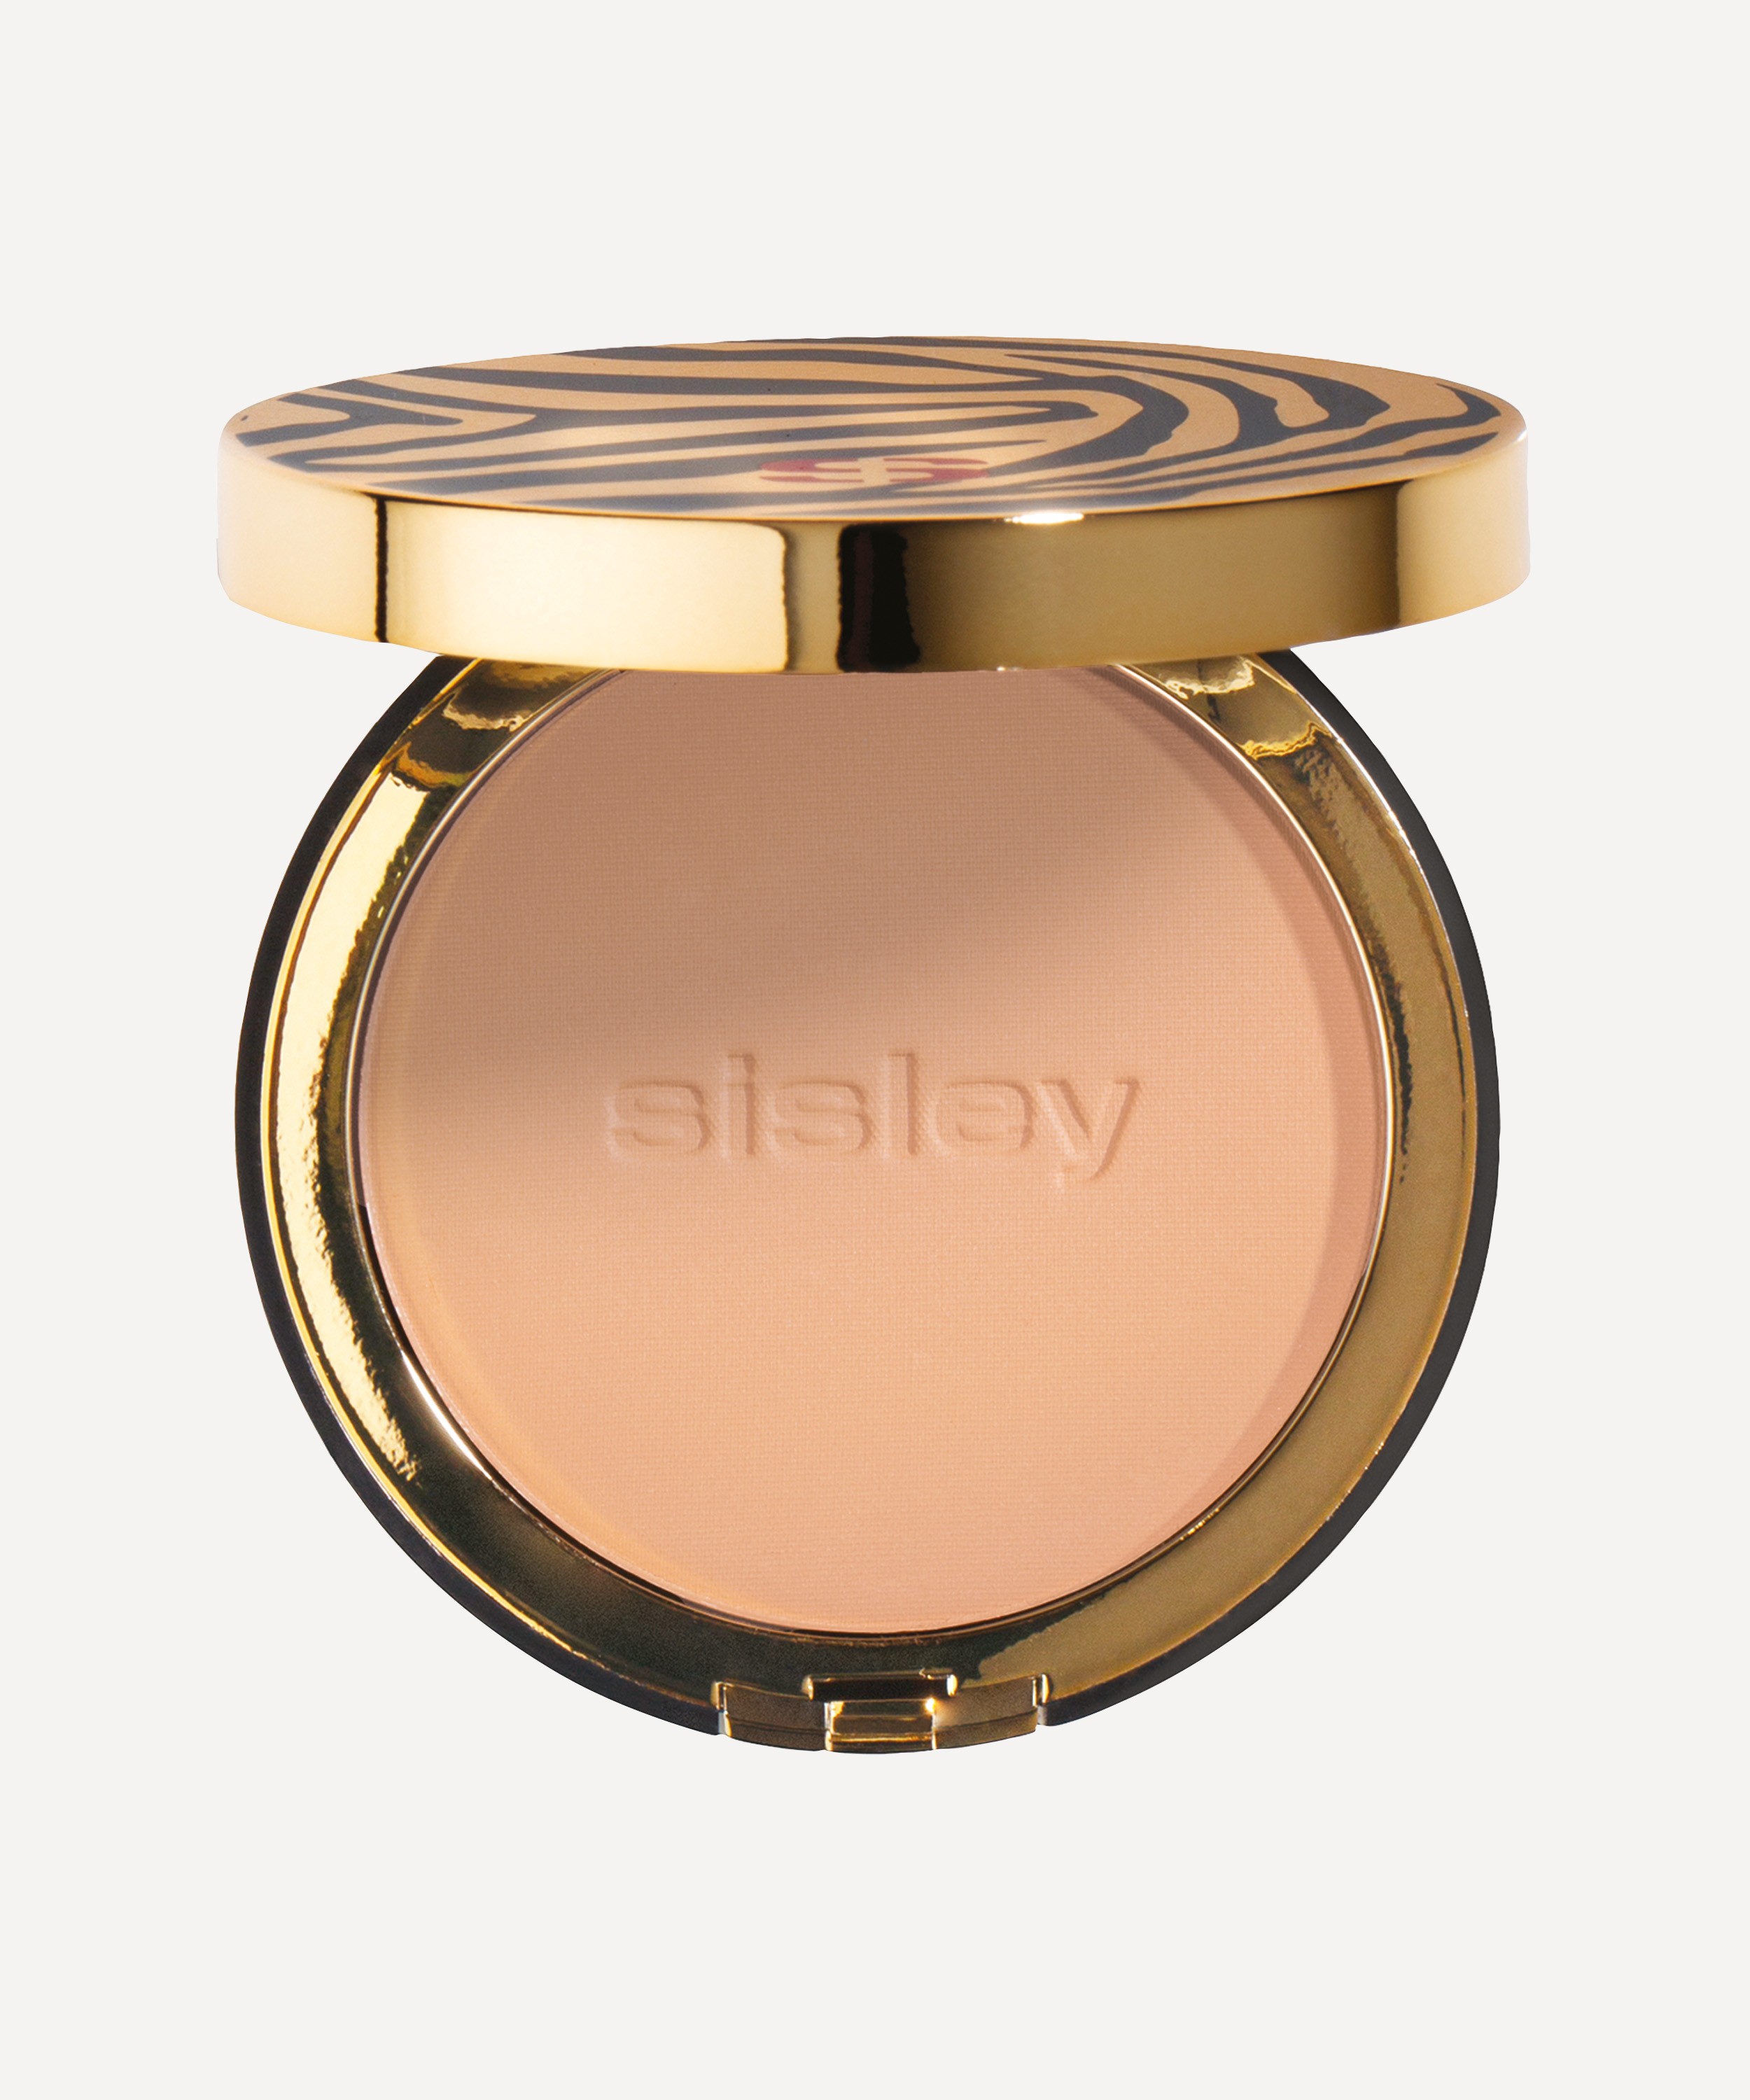 Sisley Paris - Phyto-Poudre Compact in Sandy image number 0